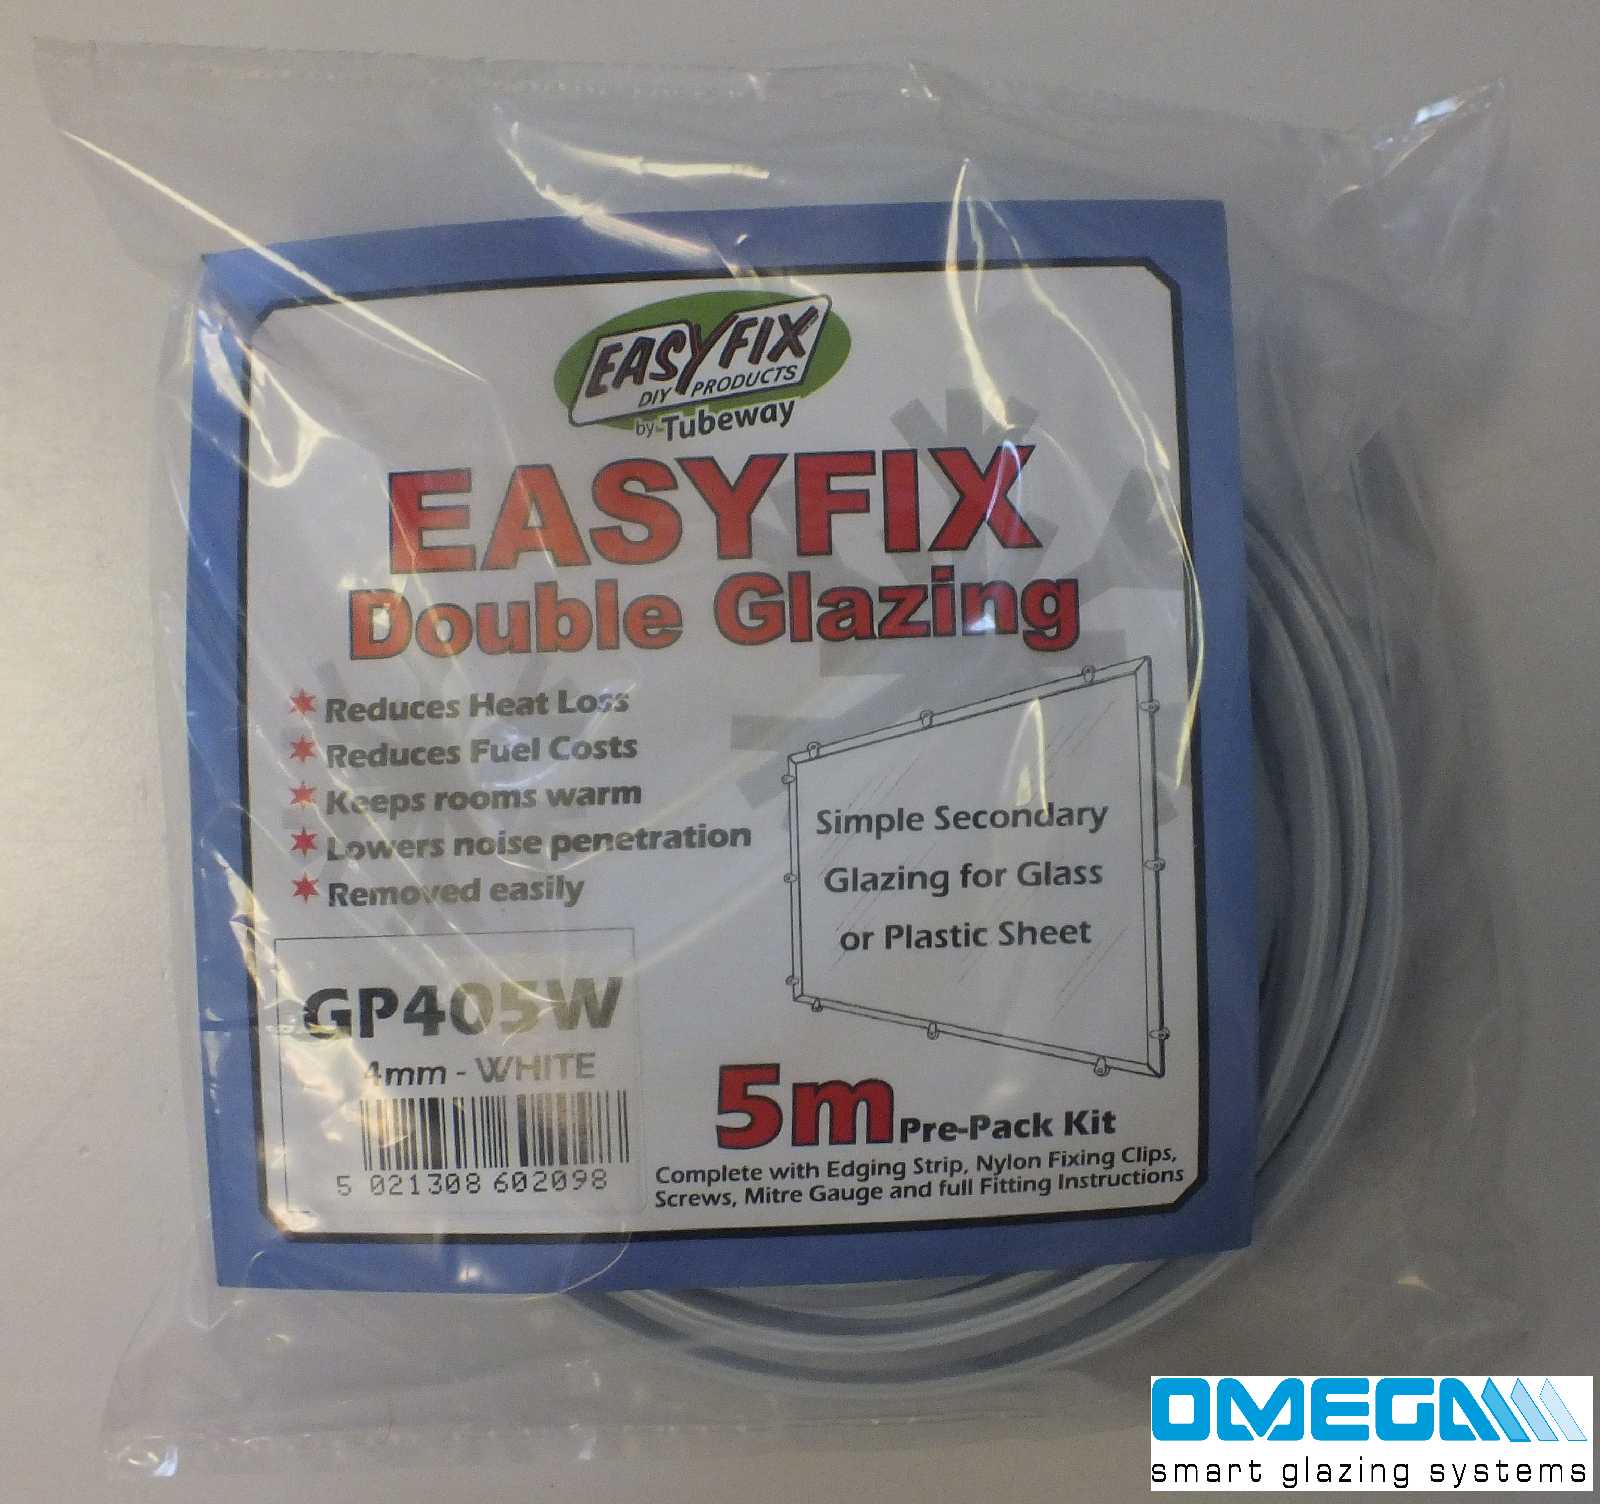 Easyfix Clipglaze Edging Kit - 5m roll of edging for 4mm Glazing Thickness, White, Clear or Brown